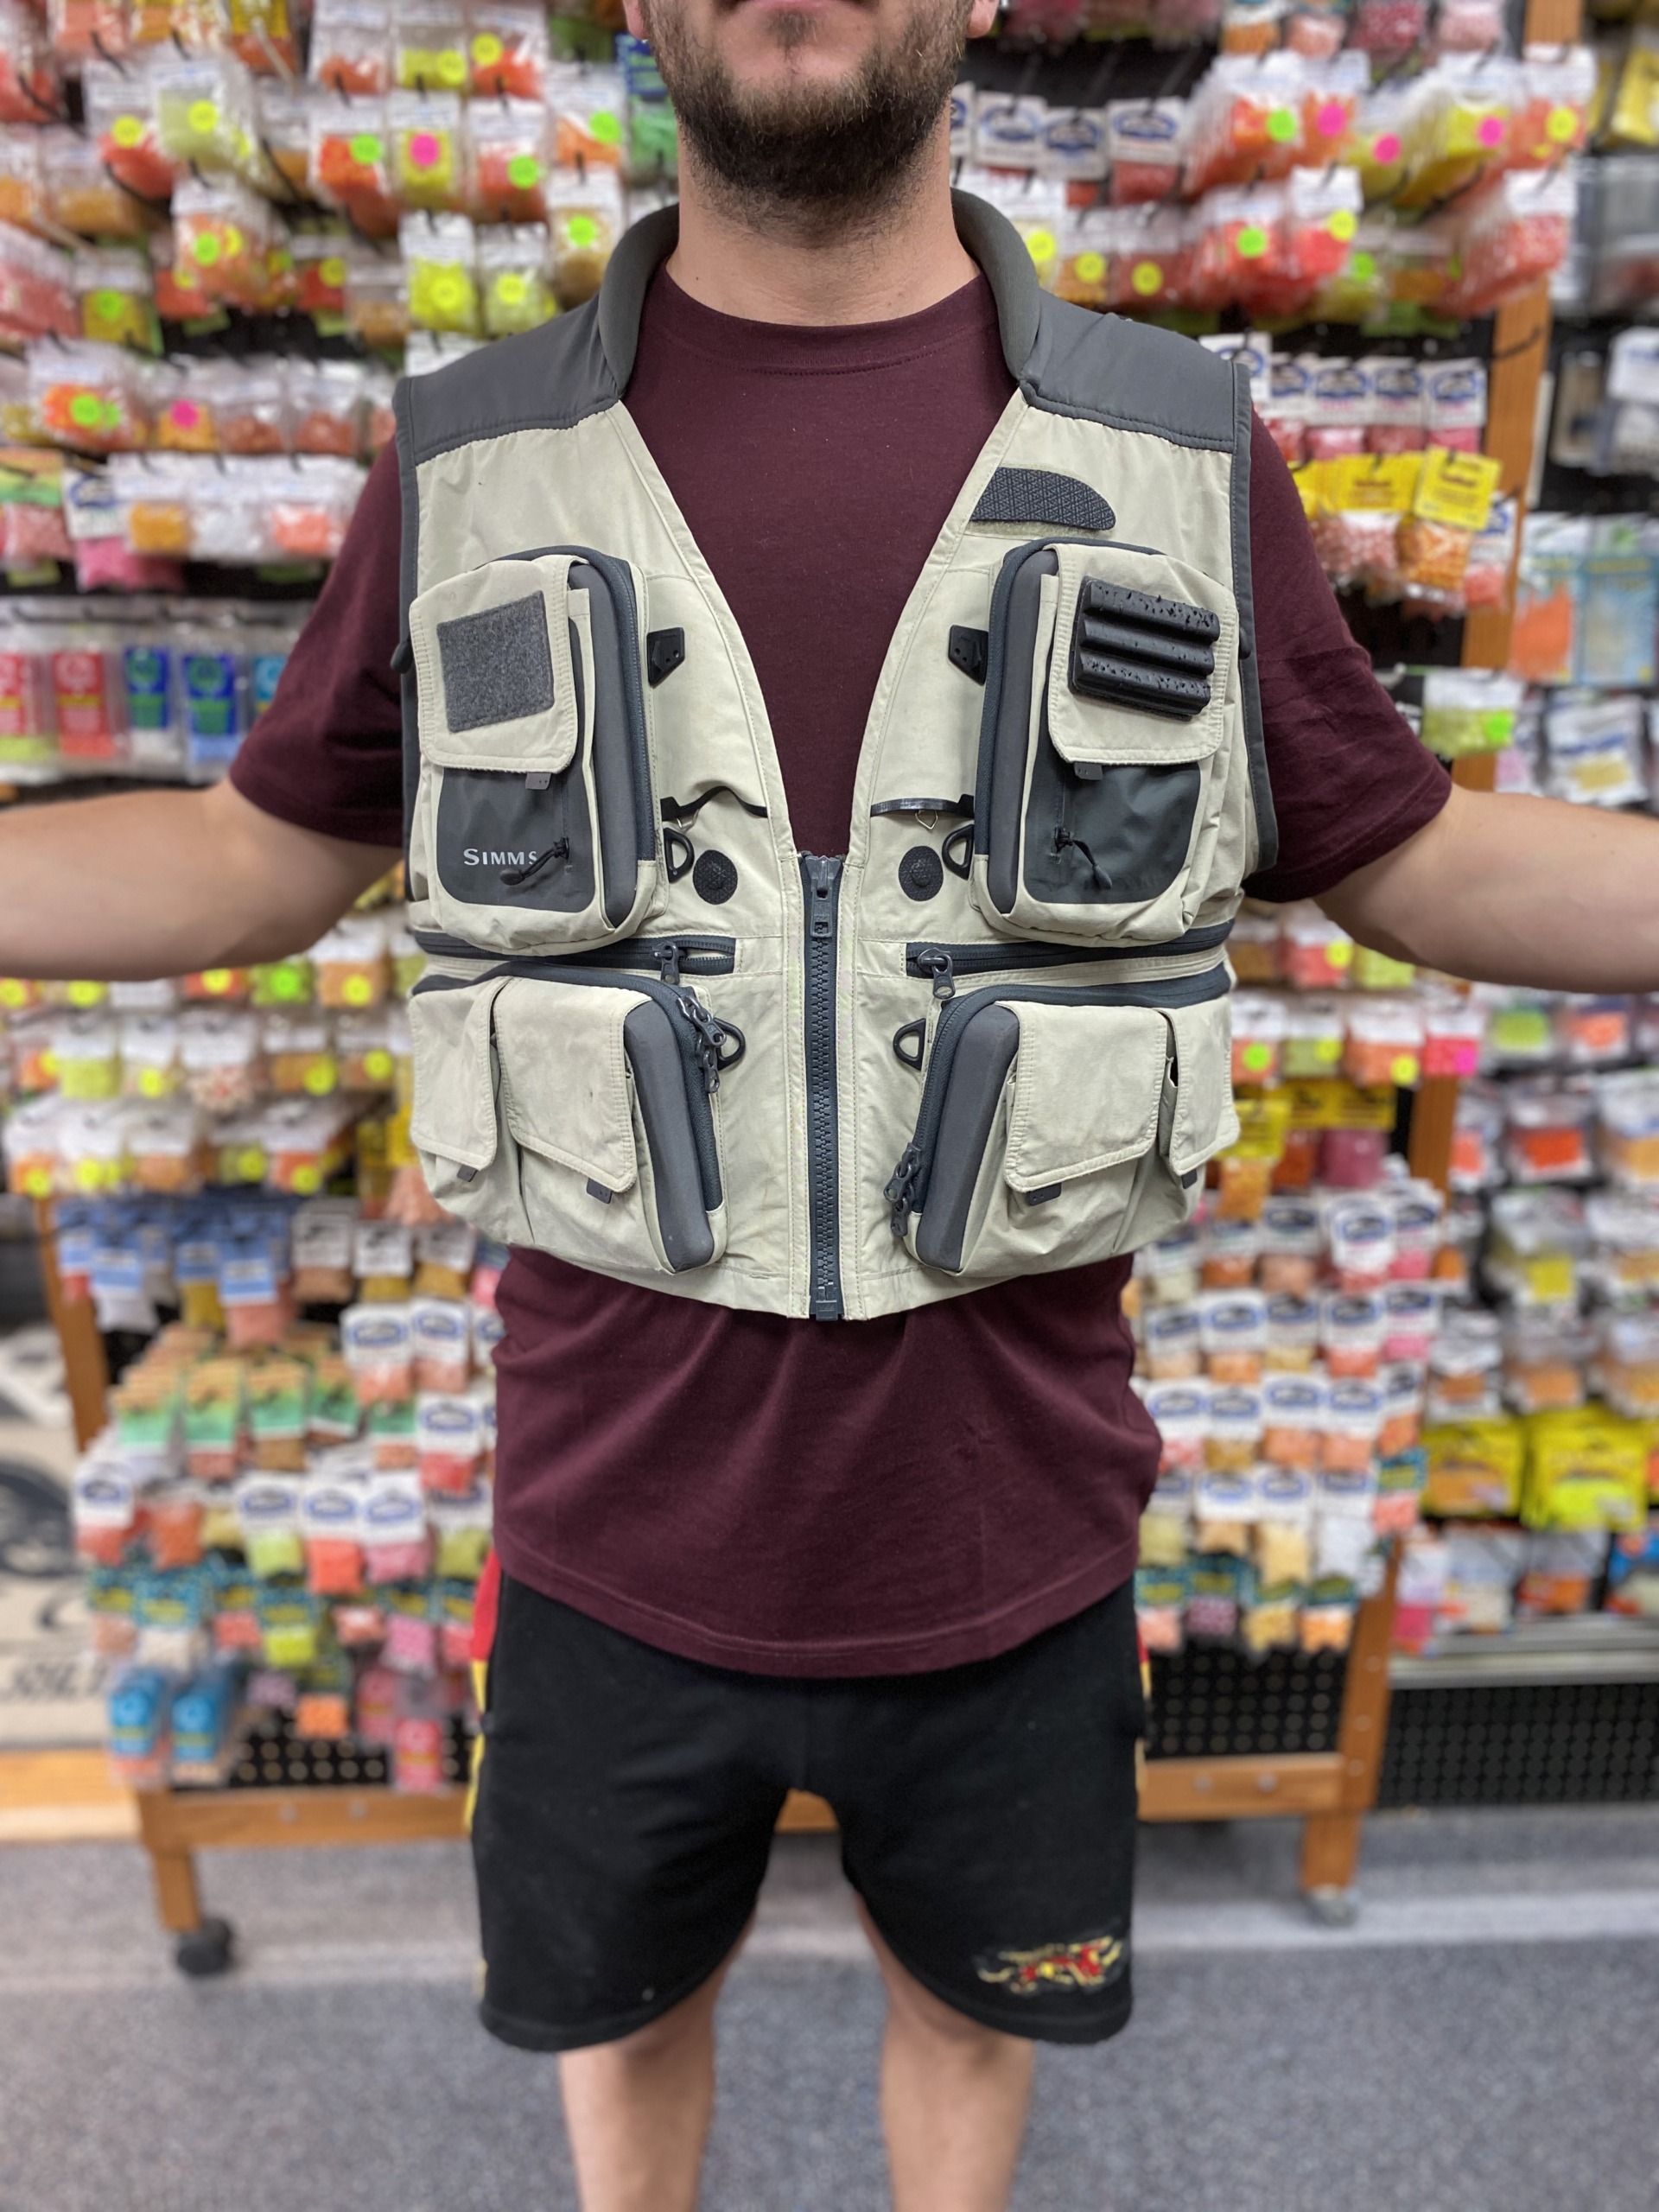 SOLD! – NEW PRICE! – Simms G3 Guide Vest – Size XL – GREAT SHAPE